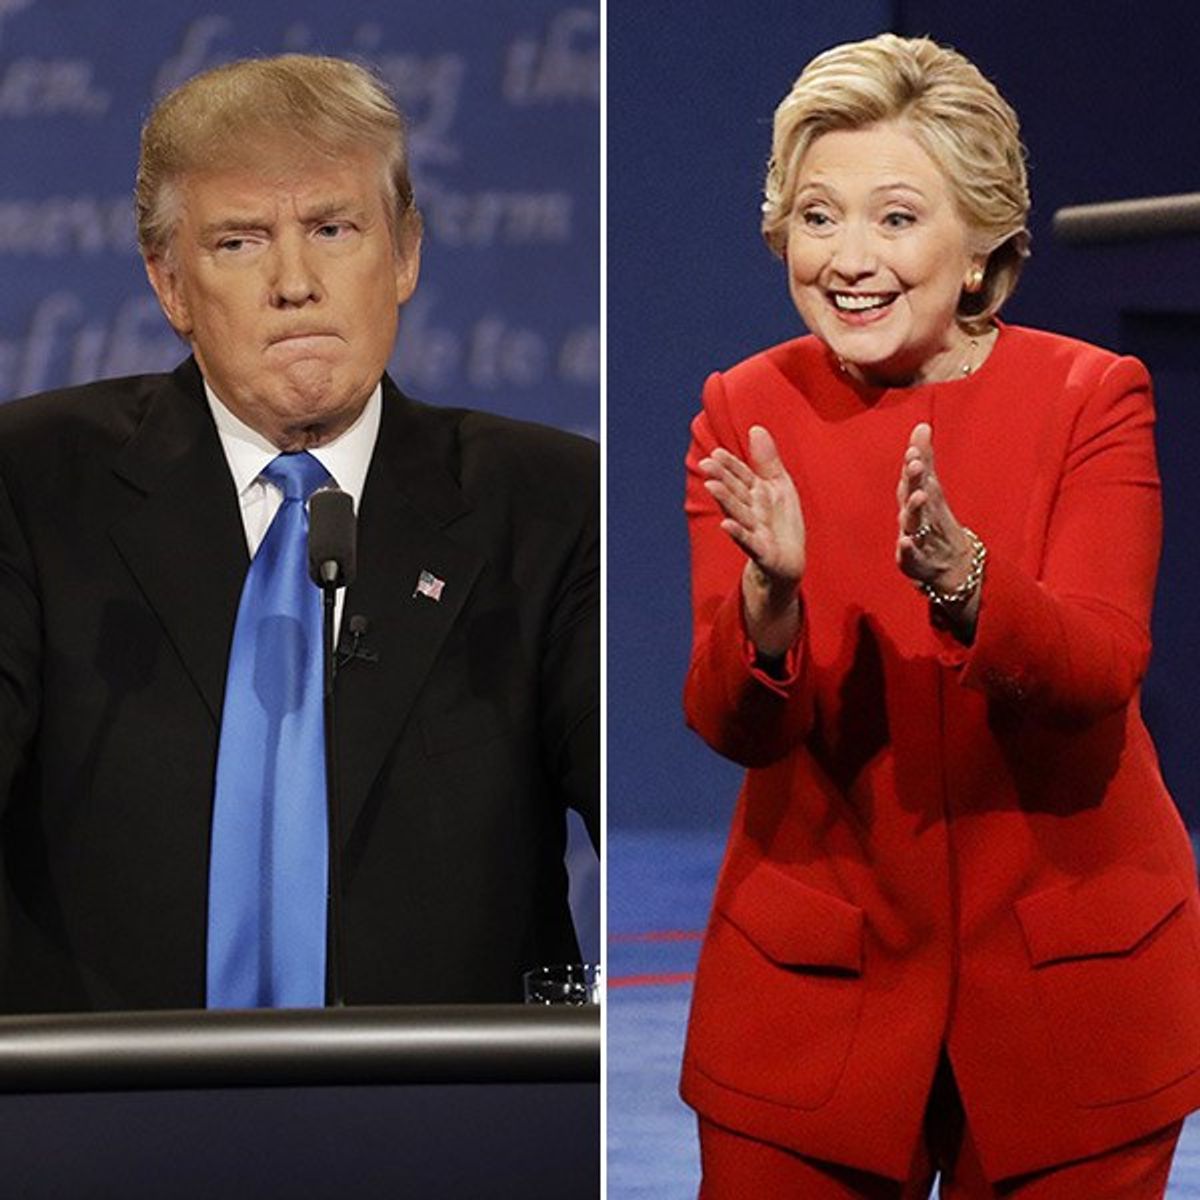 4 Reasons Why Trump Would Be A Better President Than Clinton